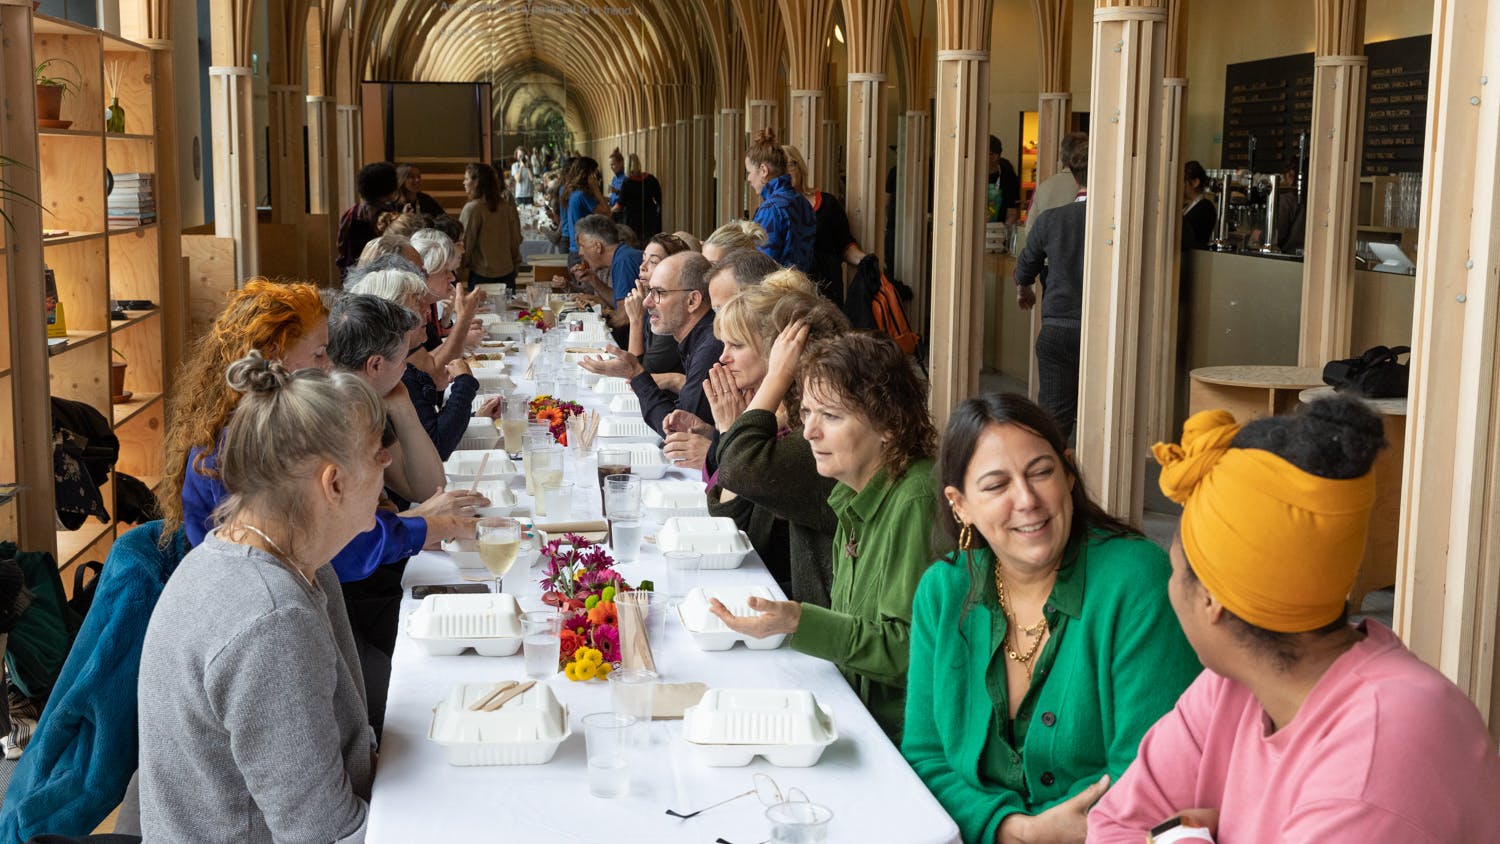 Community meal attendees at The Clearing in Quarterhouse, Folkestone